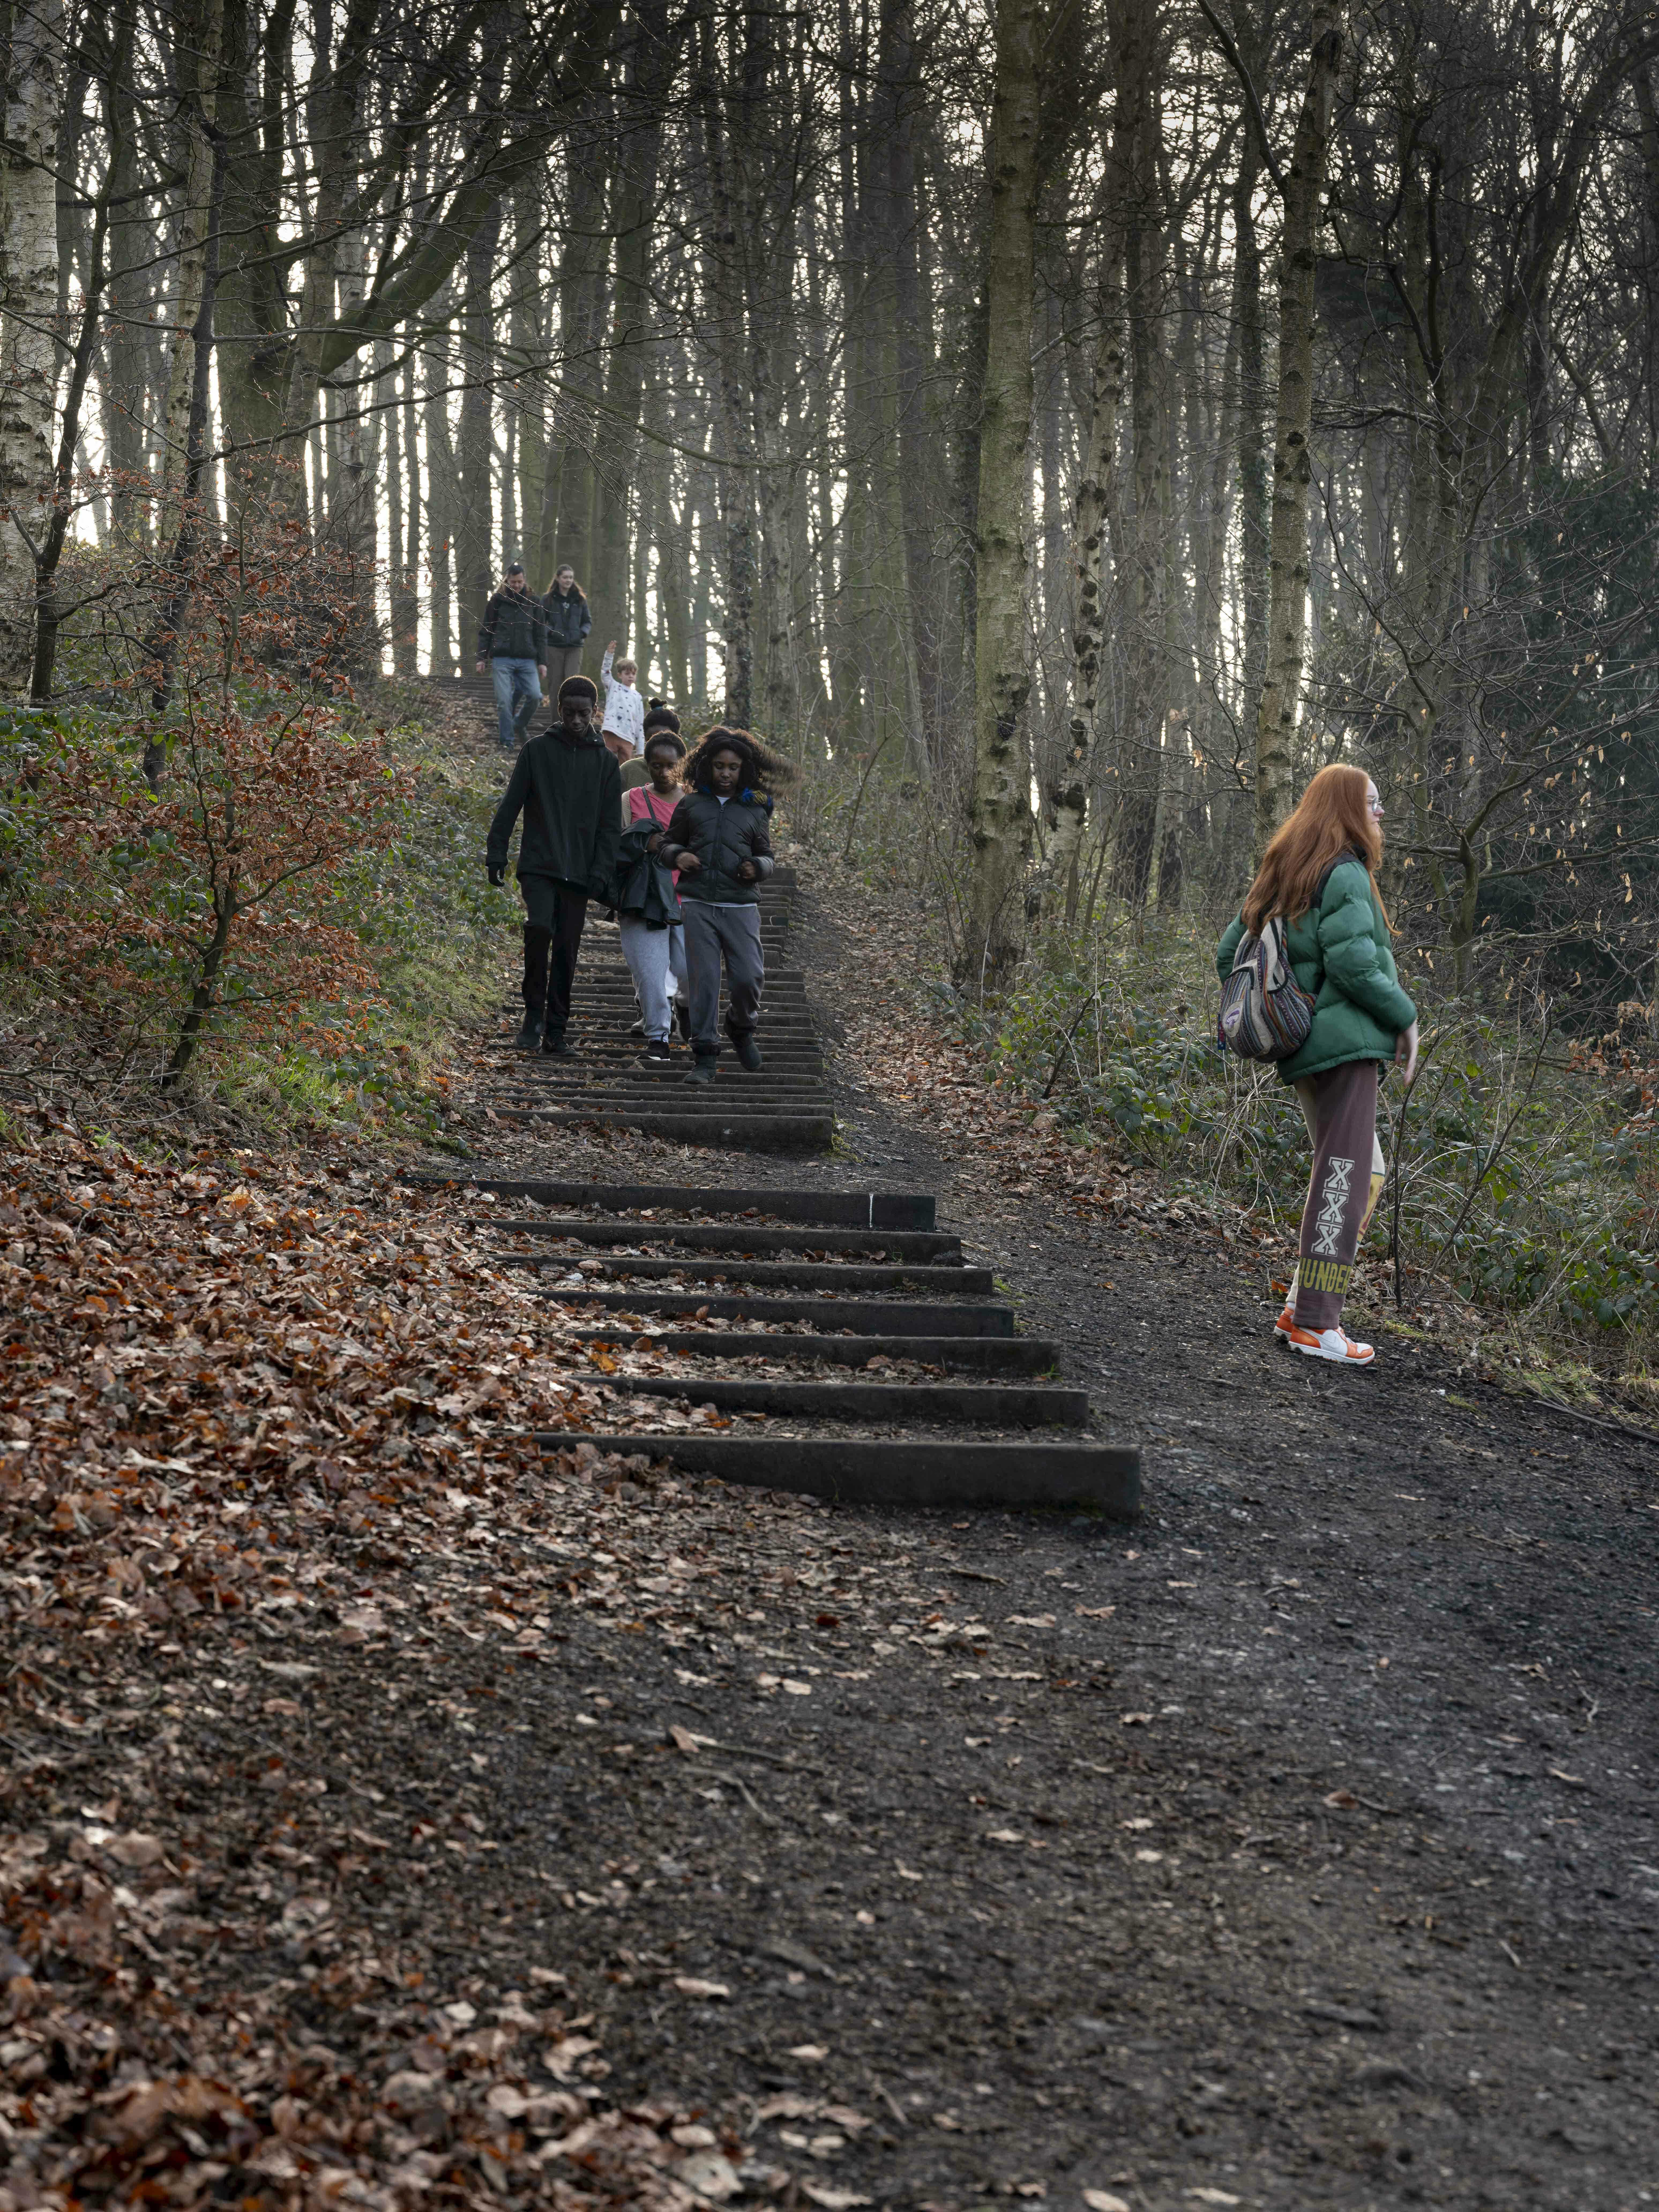 People walking on a series of wooden steps cut into a hillside. Trees are in the background.